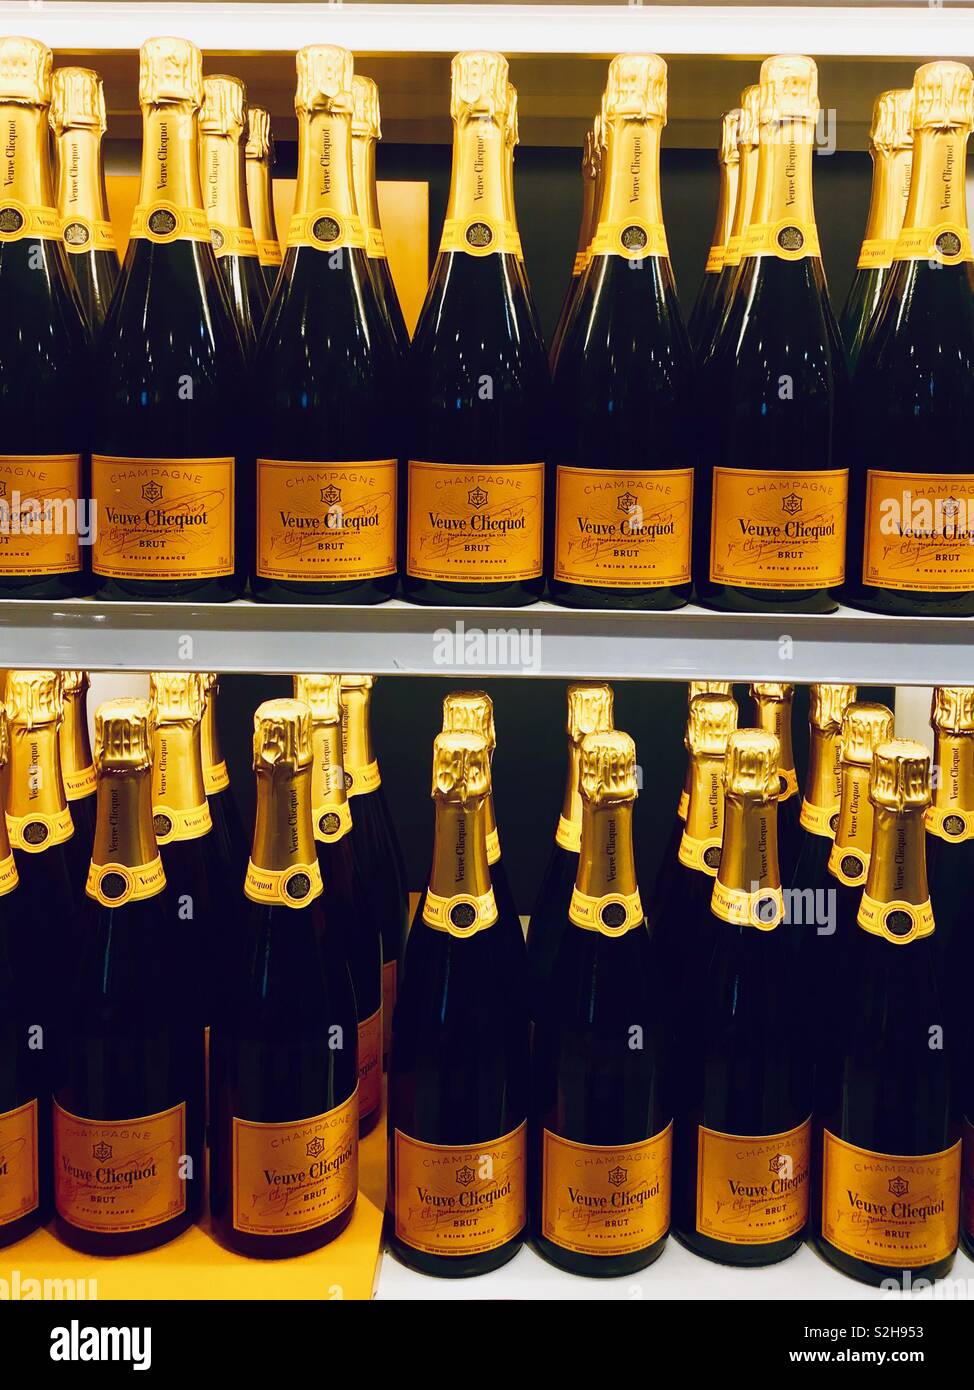 Veuve Clicquot champagne from France, bottles on display Stock Photo